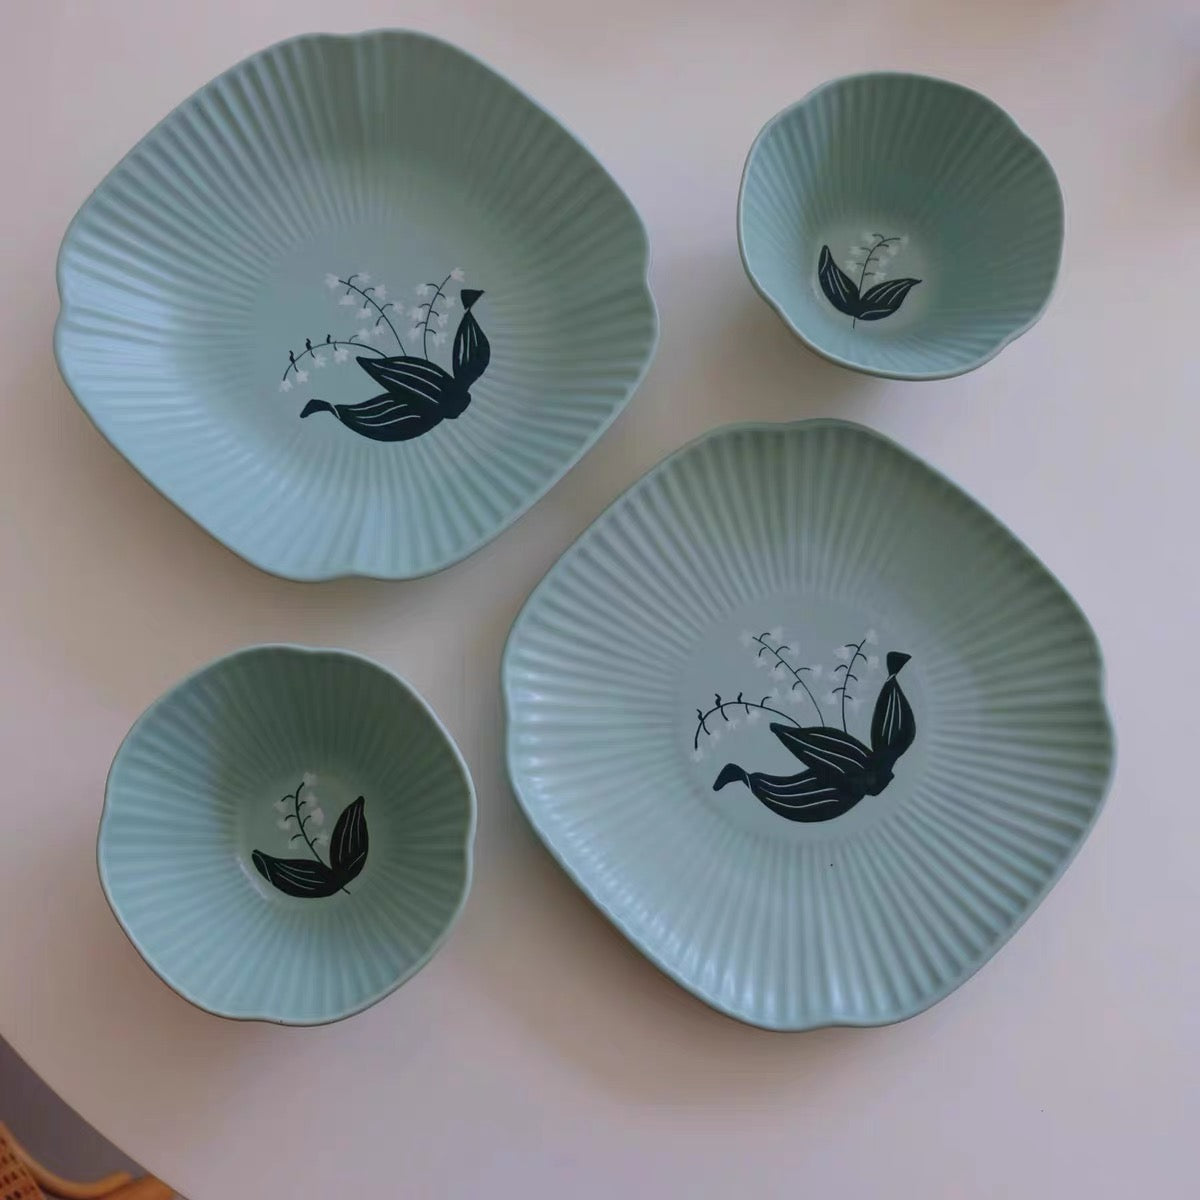 Handmade ceramics LILY OF THE VALLEY tableware